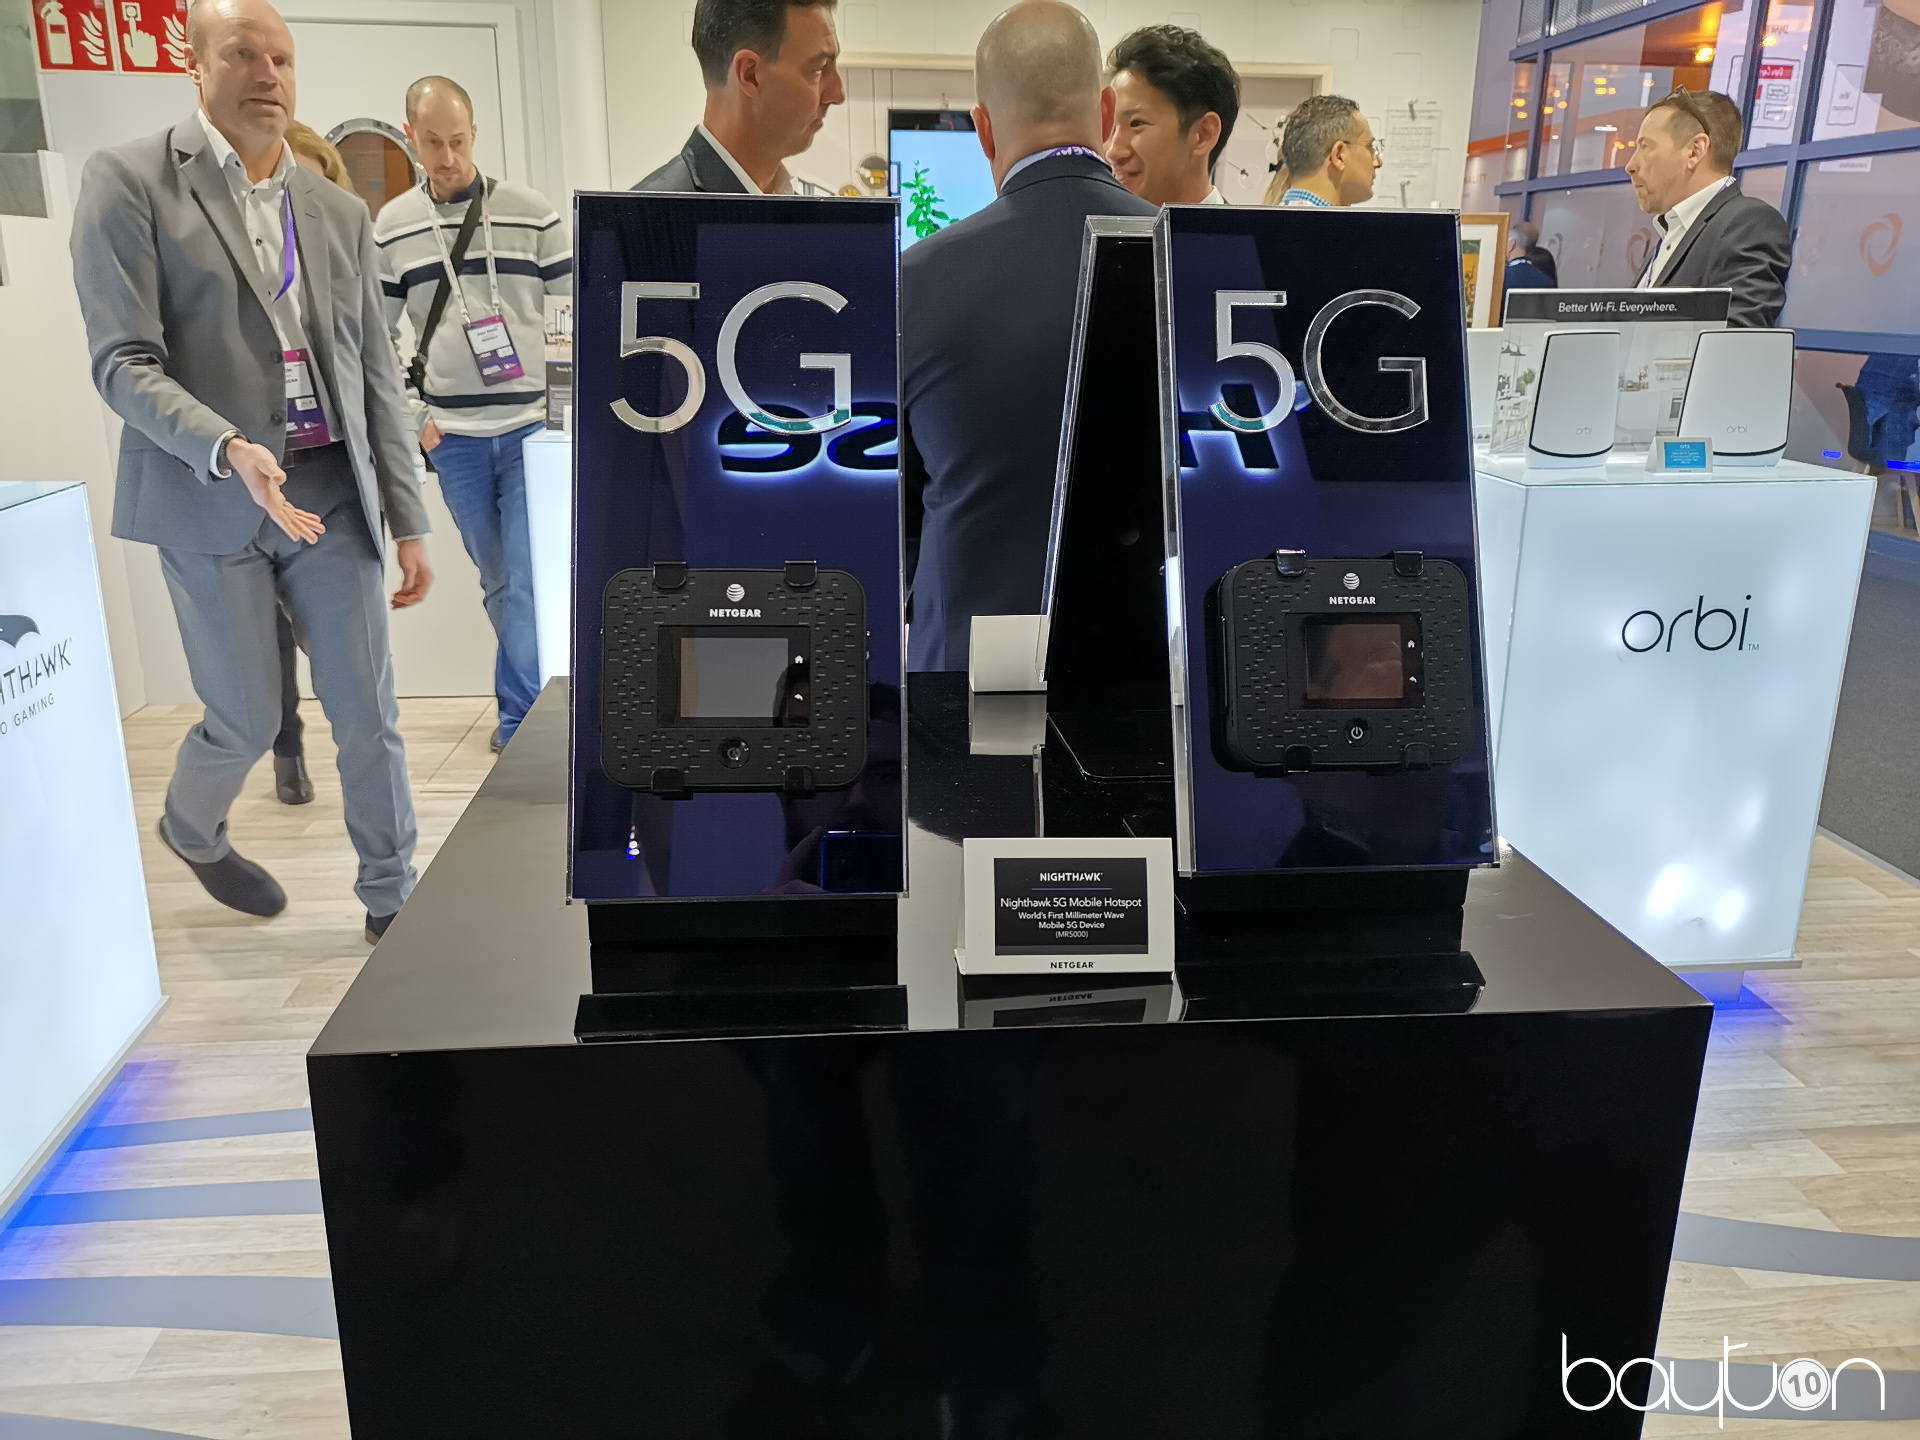 Netgear and their 5G mifi devices